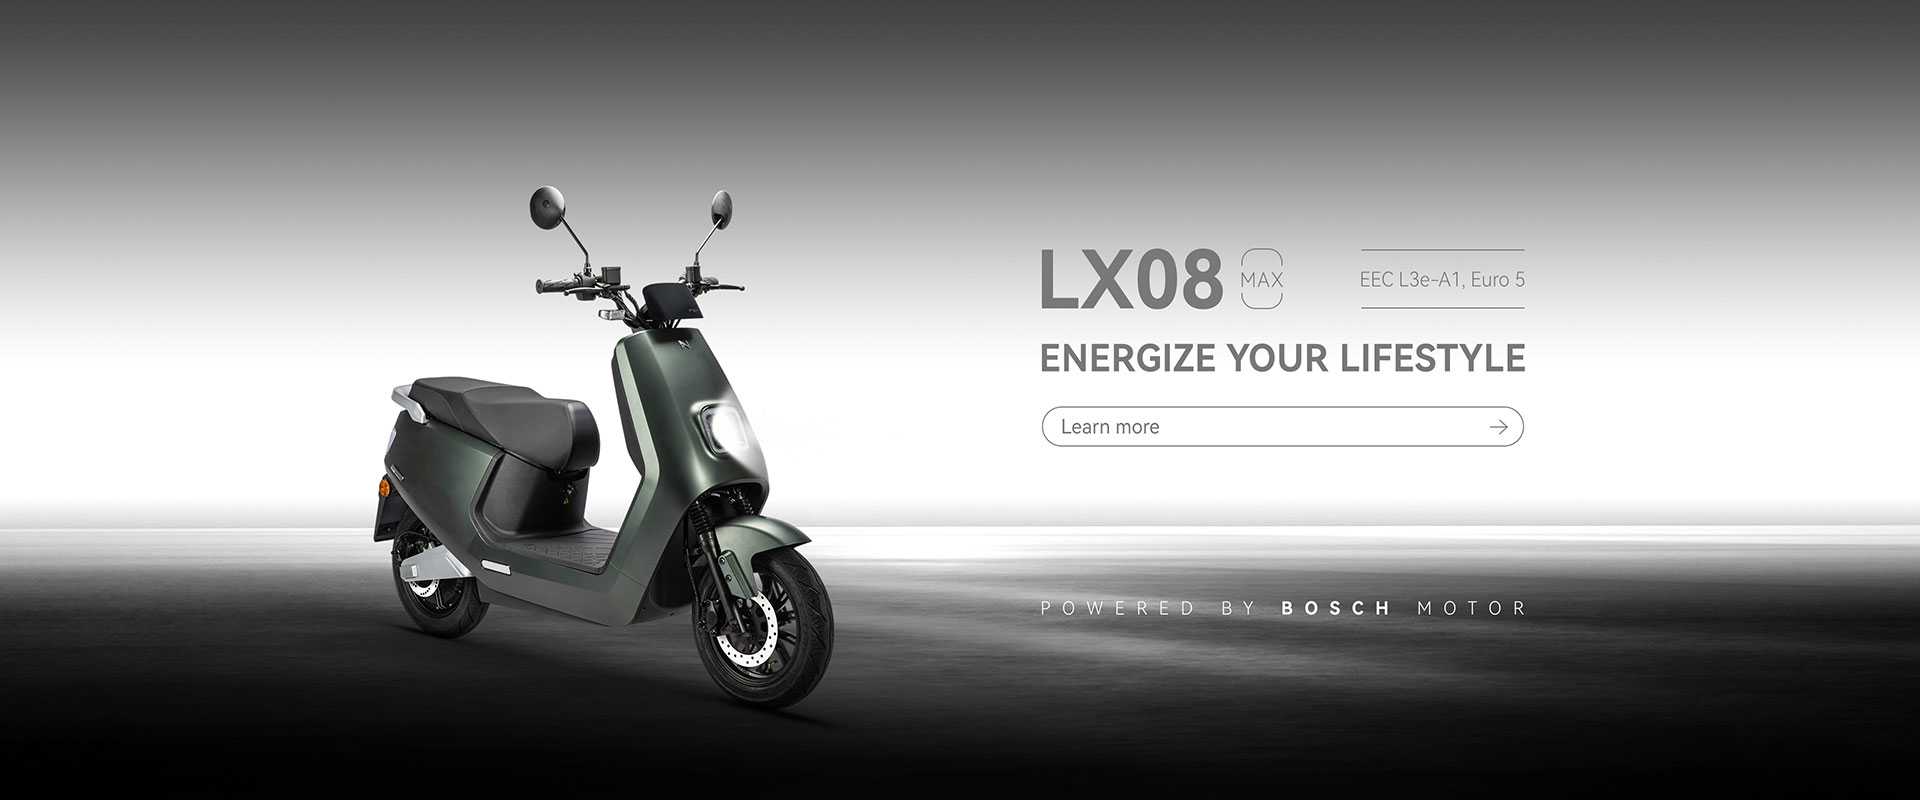 LX08max 4000w Electric motorcycle